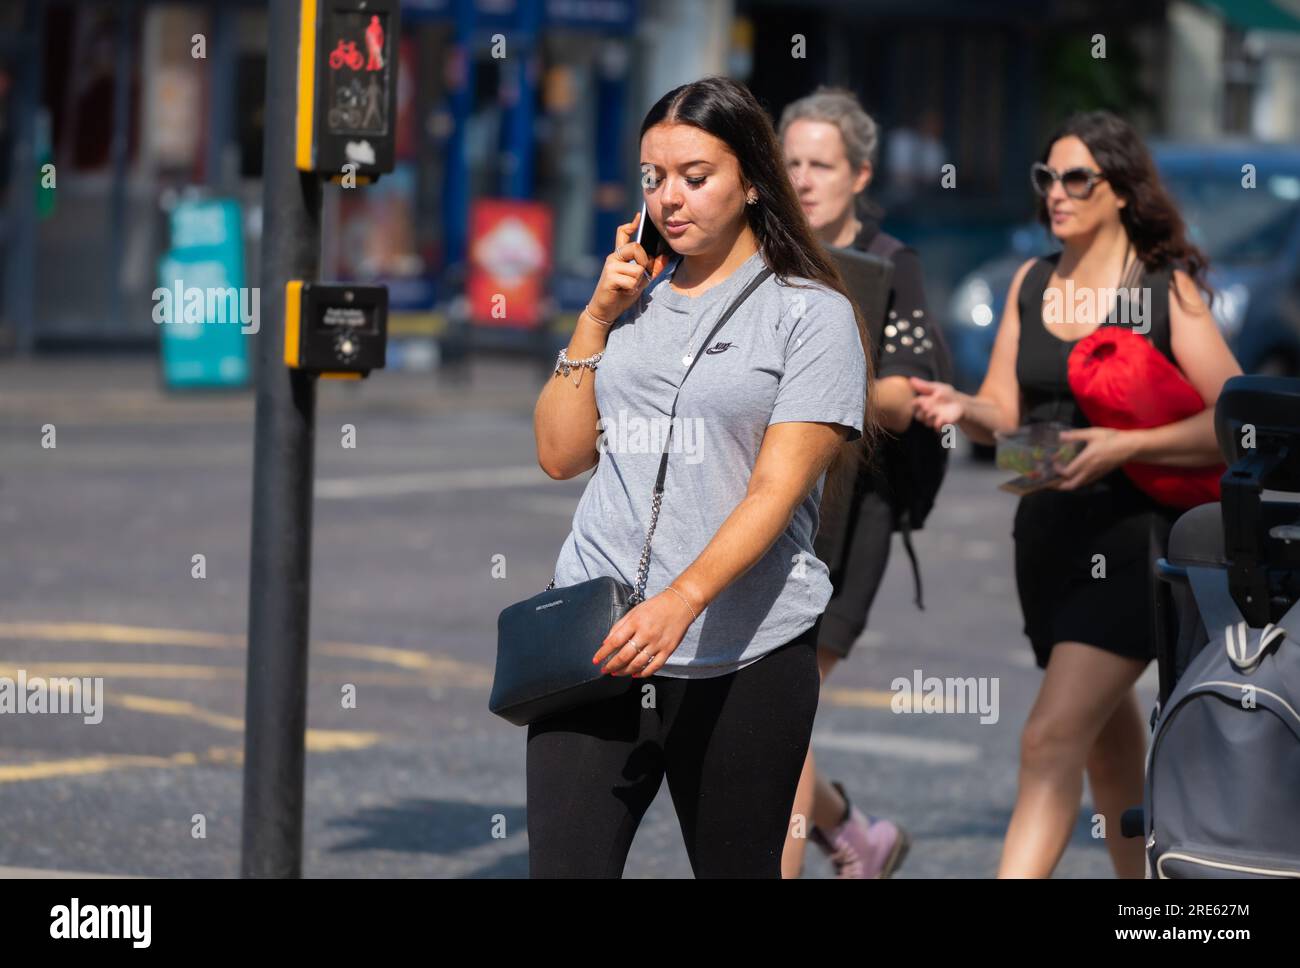 Young woman walking in busy urban area speaking on a mobile phone or cell phone, in Summer in England, UK. Stock Photo